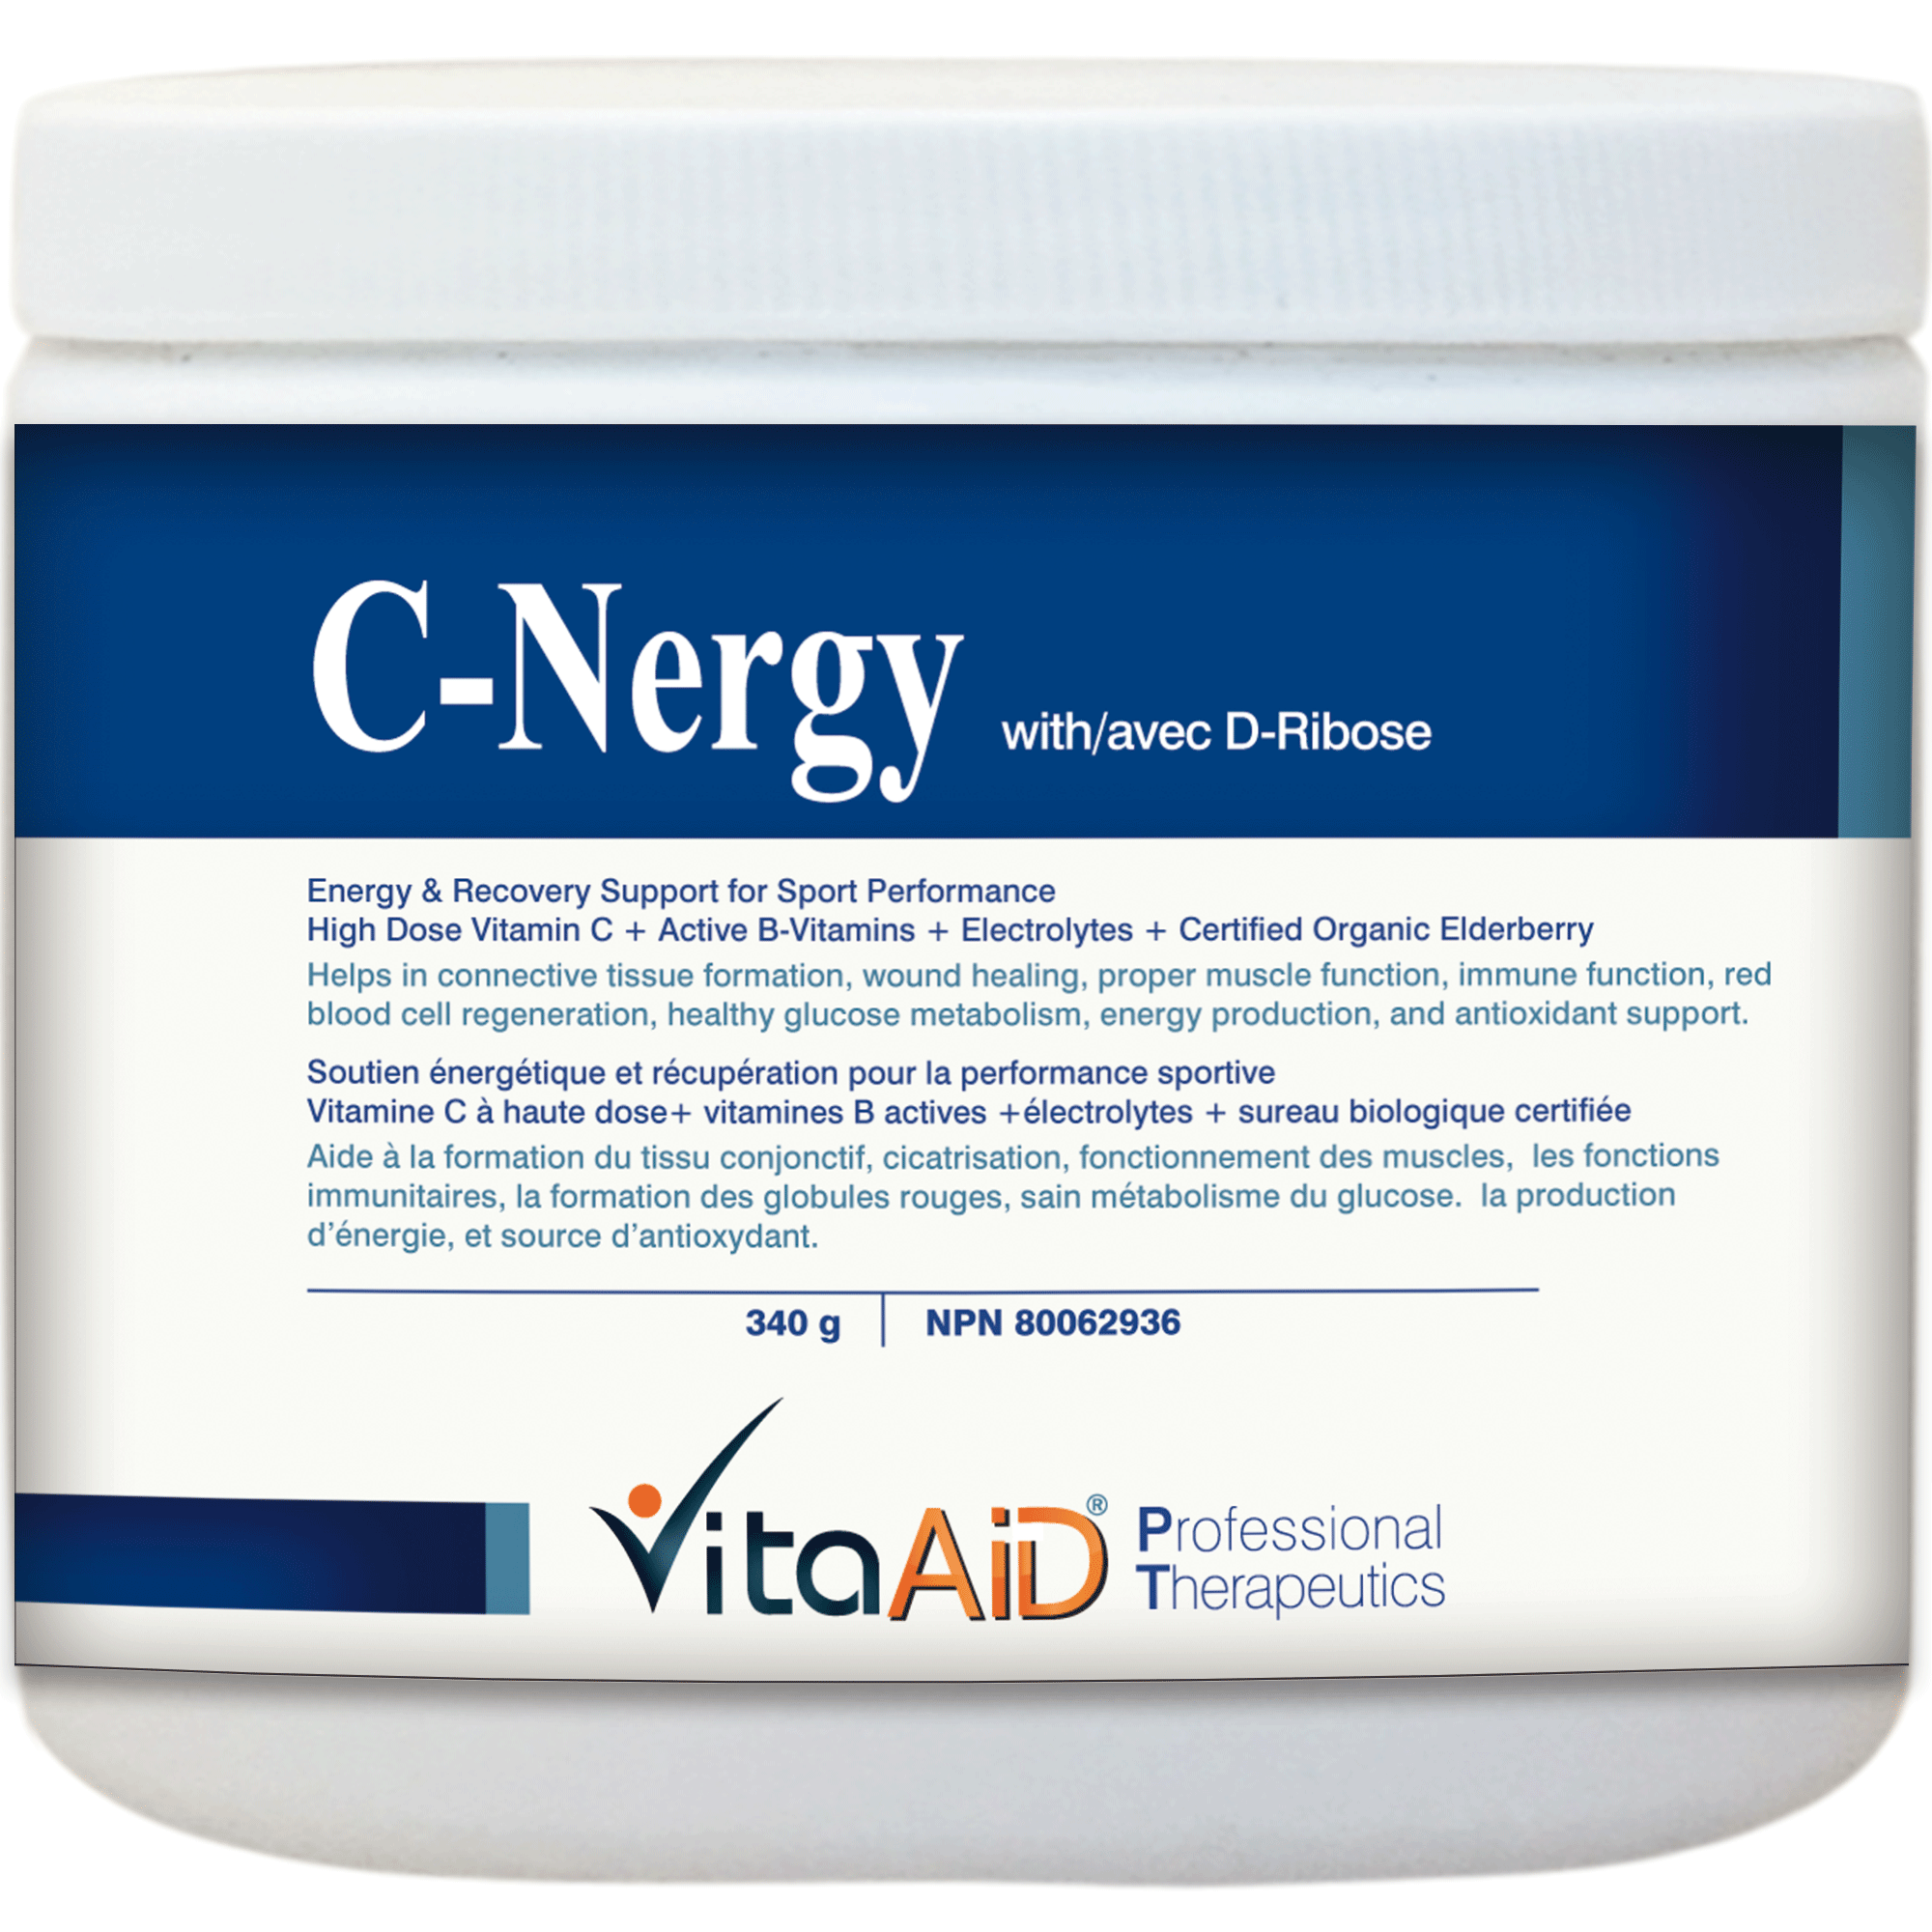 C-Nergy with D-Ribose Energy & Recovery Support for Sport Performance 340 g - iwellnessbox